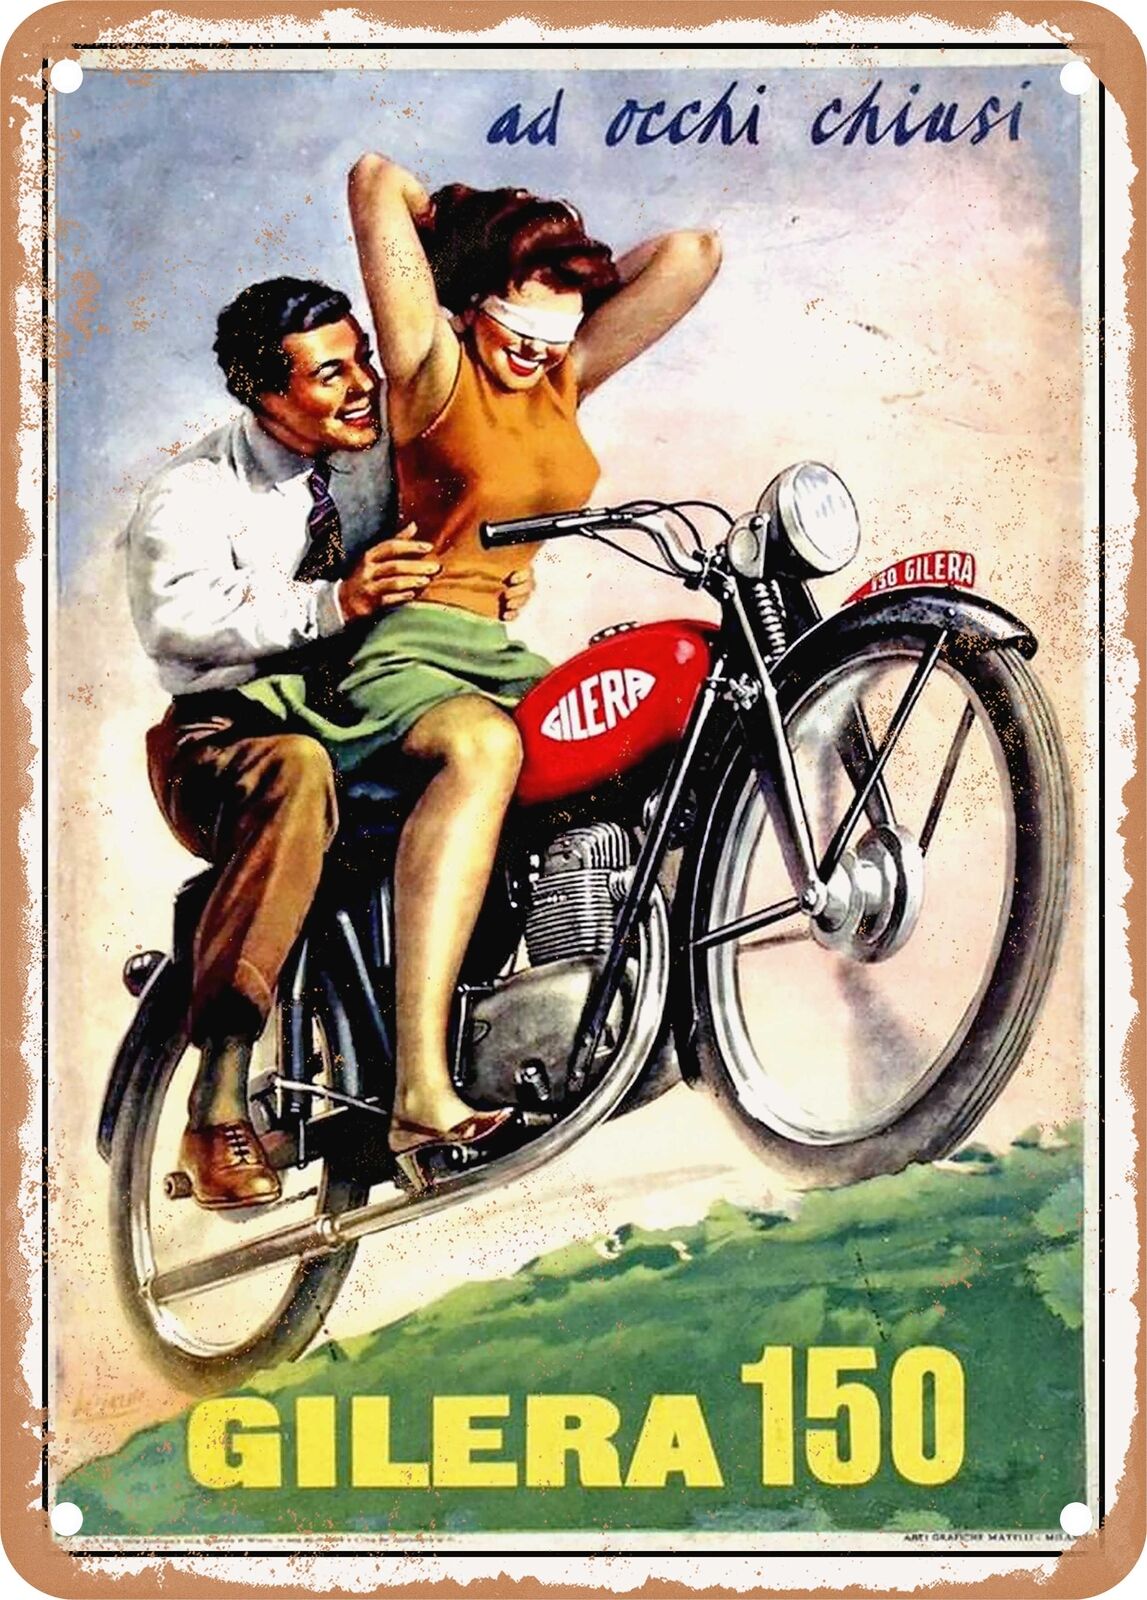 METAL SIGN - 1954 With Closed Eyes Gilera 150 Vintage Ad